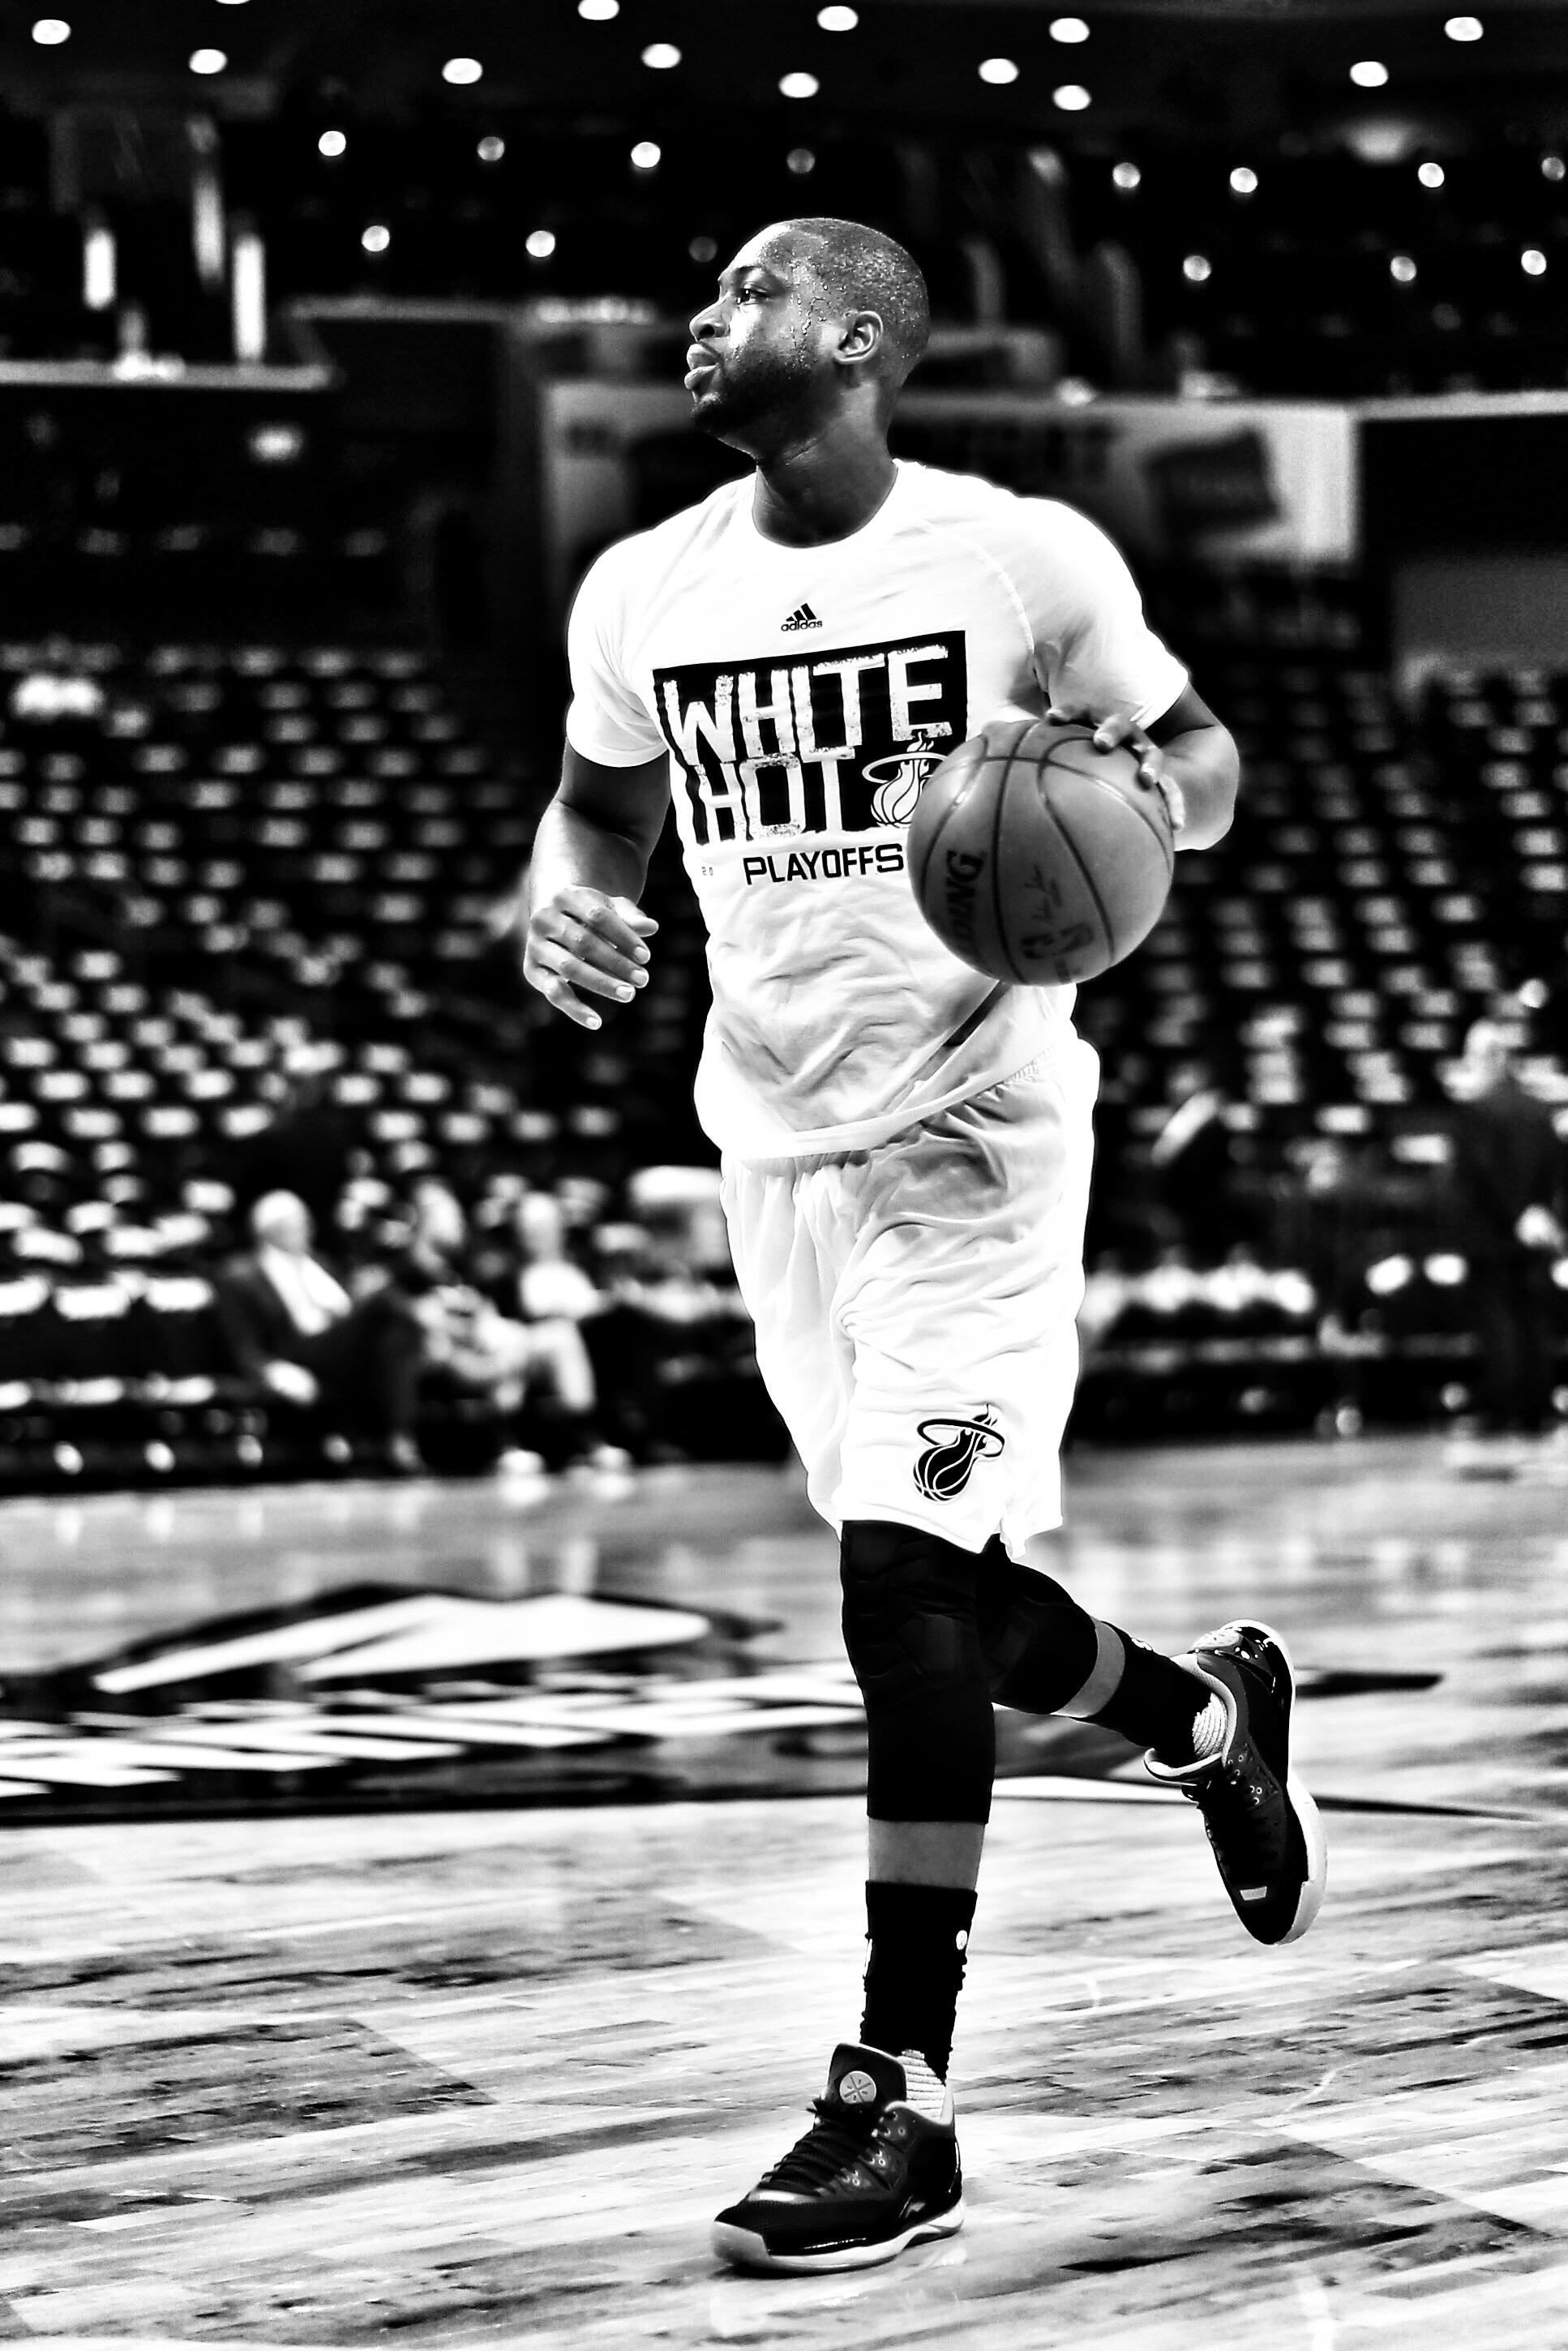 CHARLOTTE, NC - APRIL 23: (EDITORS NOTE: THIS IMAGE HAS BEEN CREATED WITH THE USE OF DIGITAL FILTERS) Dwyane Wade #3 of the Miami Heat warms up before their game against the Charlotte Hornets in game three of the Eastern Conference Quarterfinals of the 2016 NBA Playoffs at Time Warner Cable Arena on April 23, 2016 in Charlotte, North Carolina. NOTE TO USER: User expressly acknowledges and agrees that, by downloading and or using this photograph, User is consenting to the terms and conditions of the Getty Images License Agreement. Streeter Lecka/Getty Images/AFP